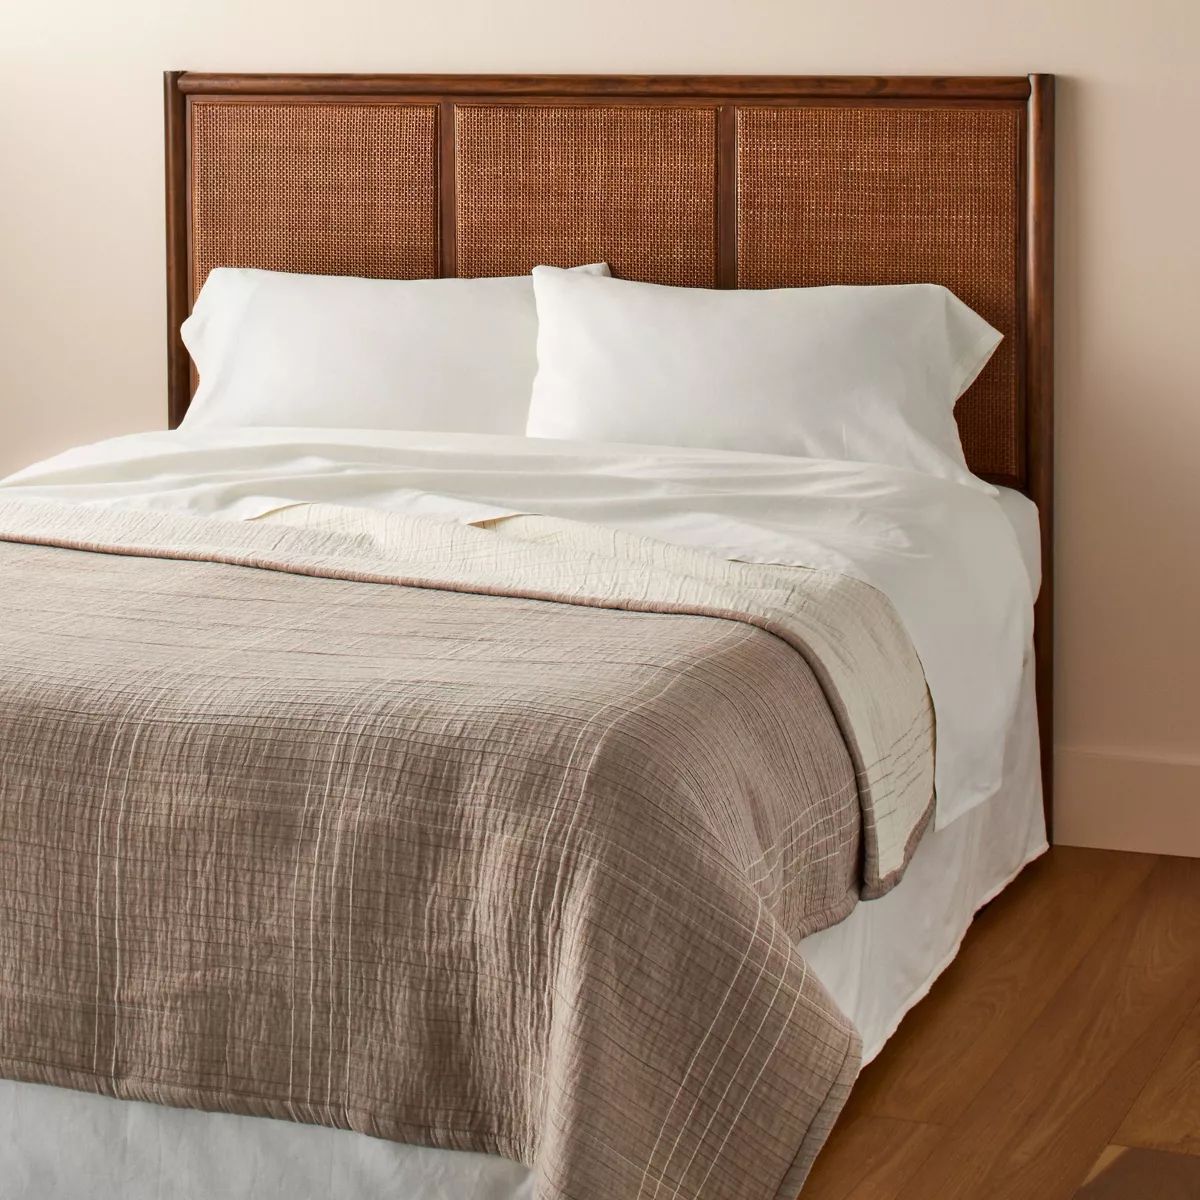 Microstripe Matelassé Coverlet - Hearth & Hand™ with Magnolia | Target